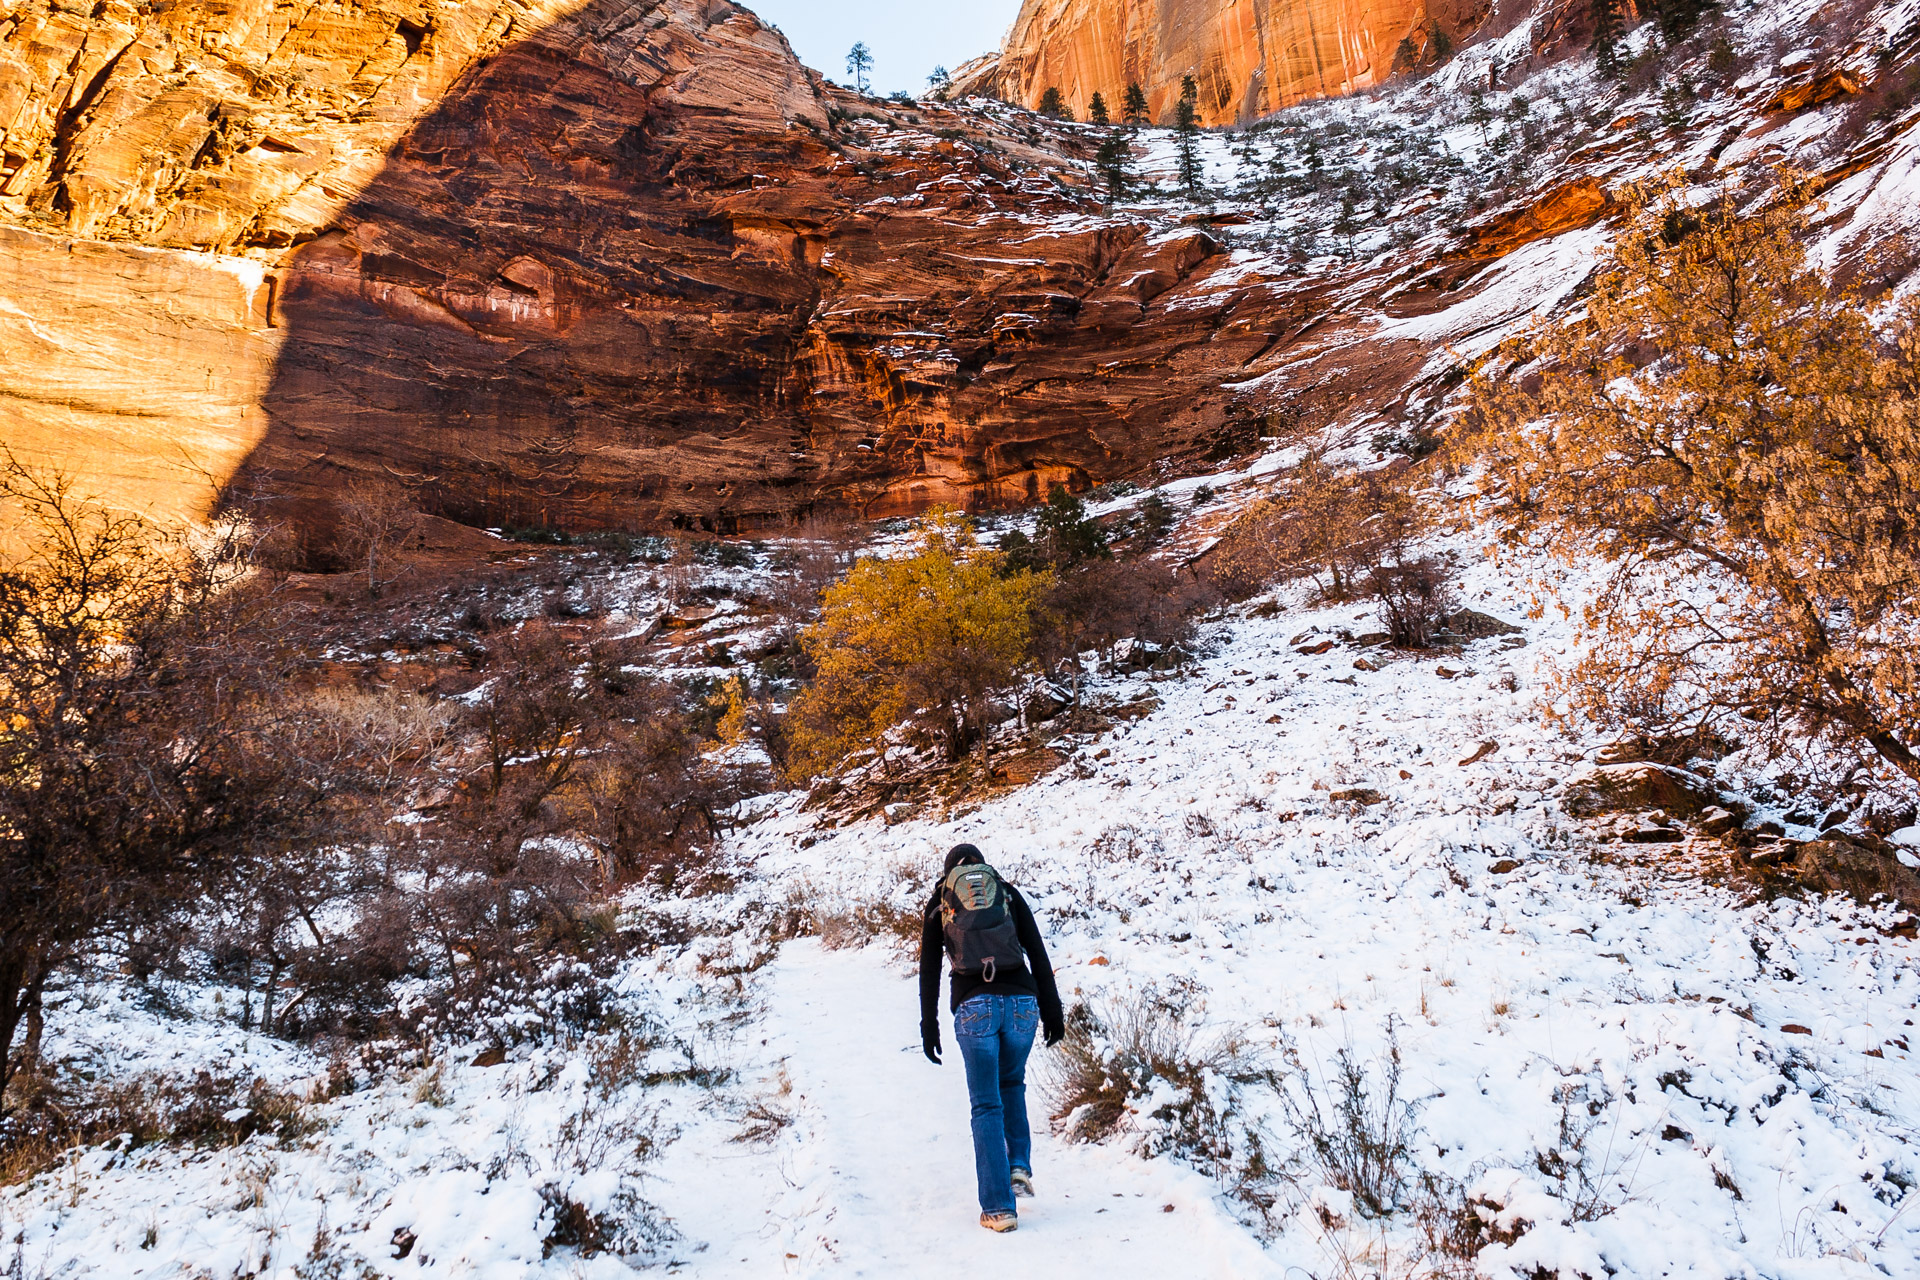 Flashback Trip: A Winter Hike At Zion